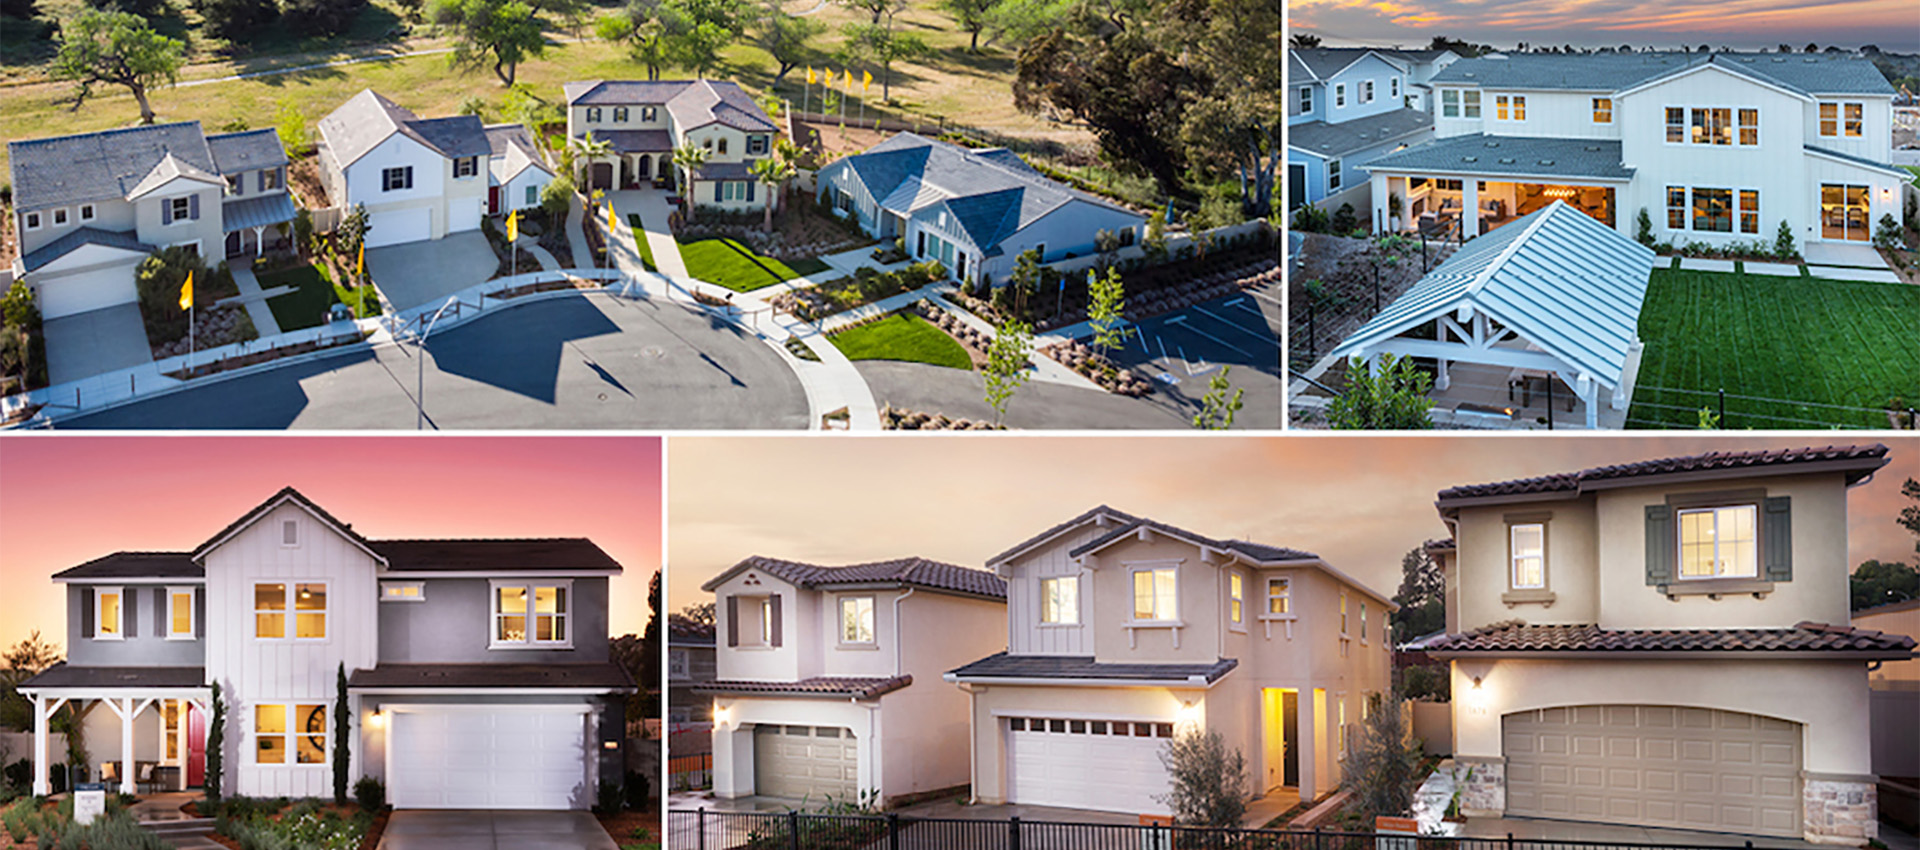 Multiple exterior images in a collage